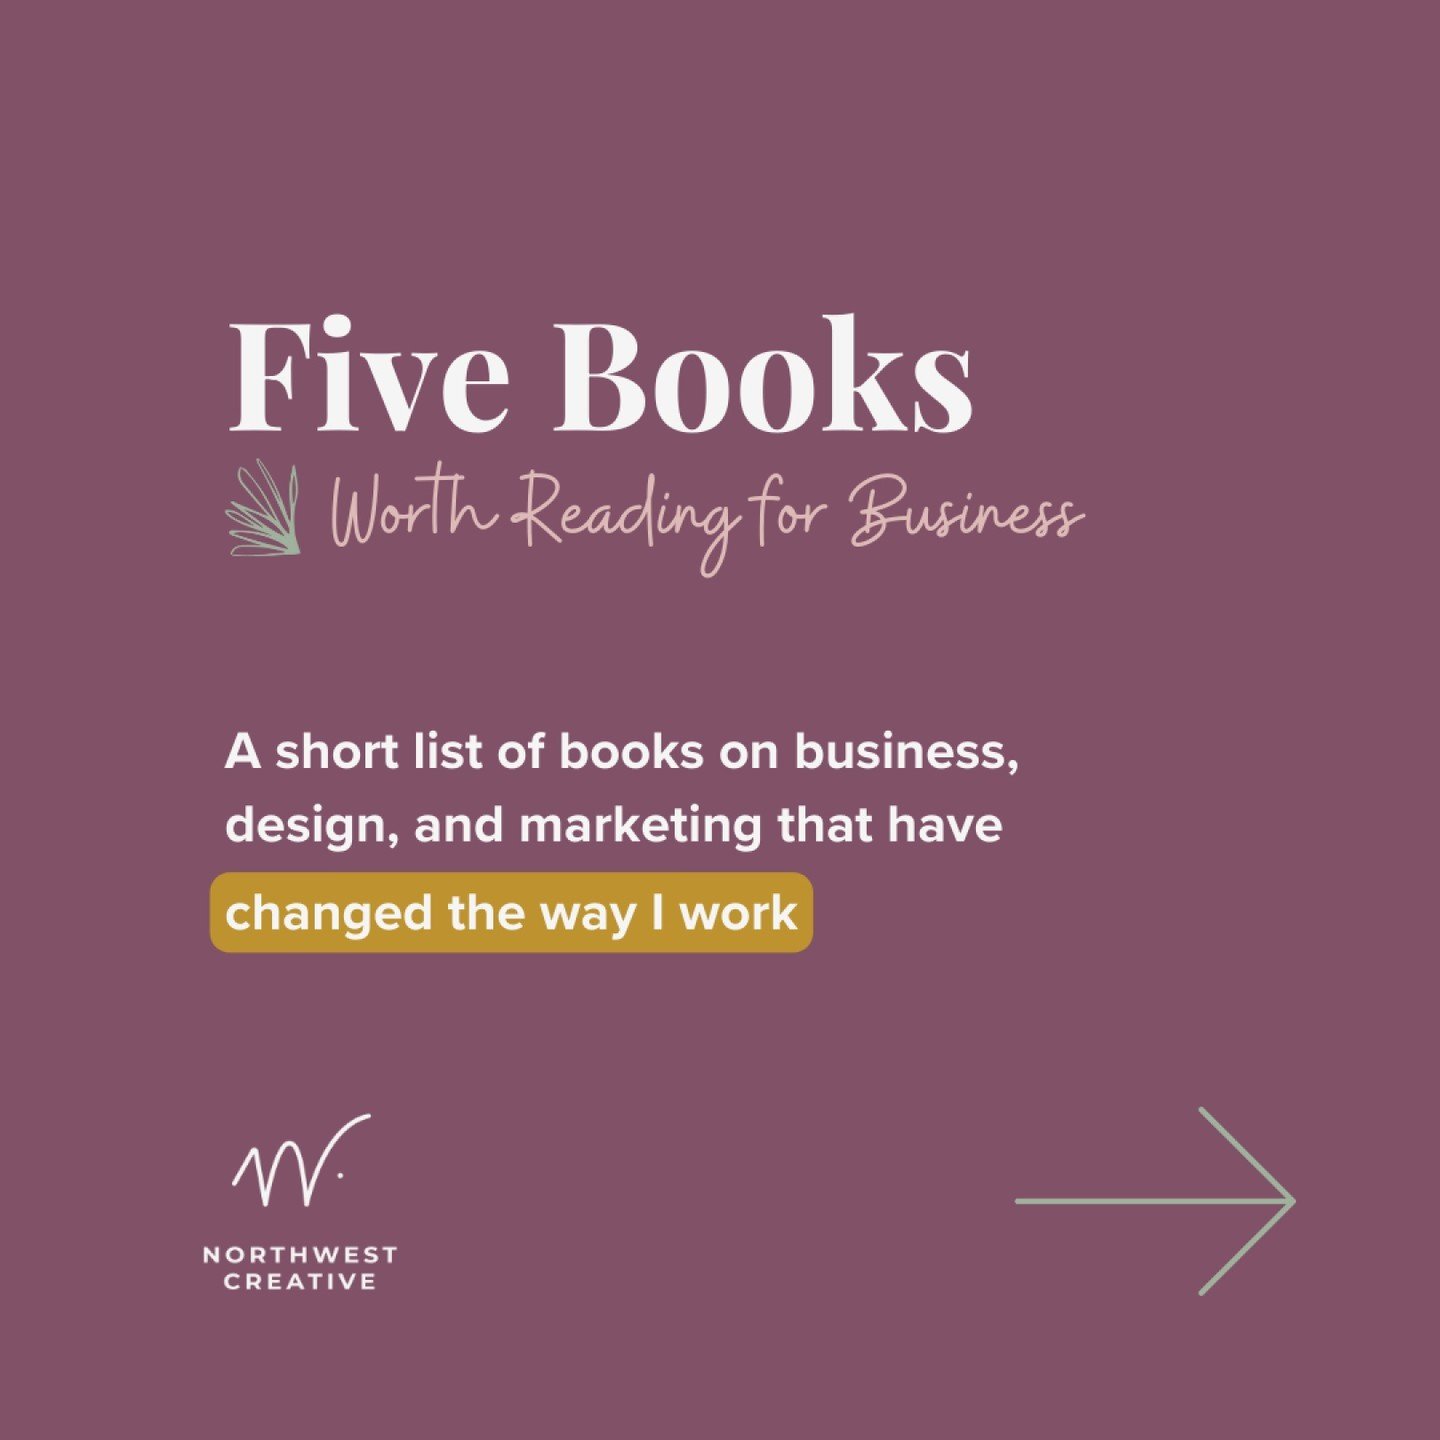 🖐️ BOOKS WORTH READING FOR BUSINESS 📚

There are certain books that I go back to consistently because they have changed the way I work in some way.

My list goes beyond these five because there are so many great ones out there, but here are FIVE BO